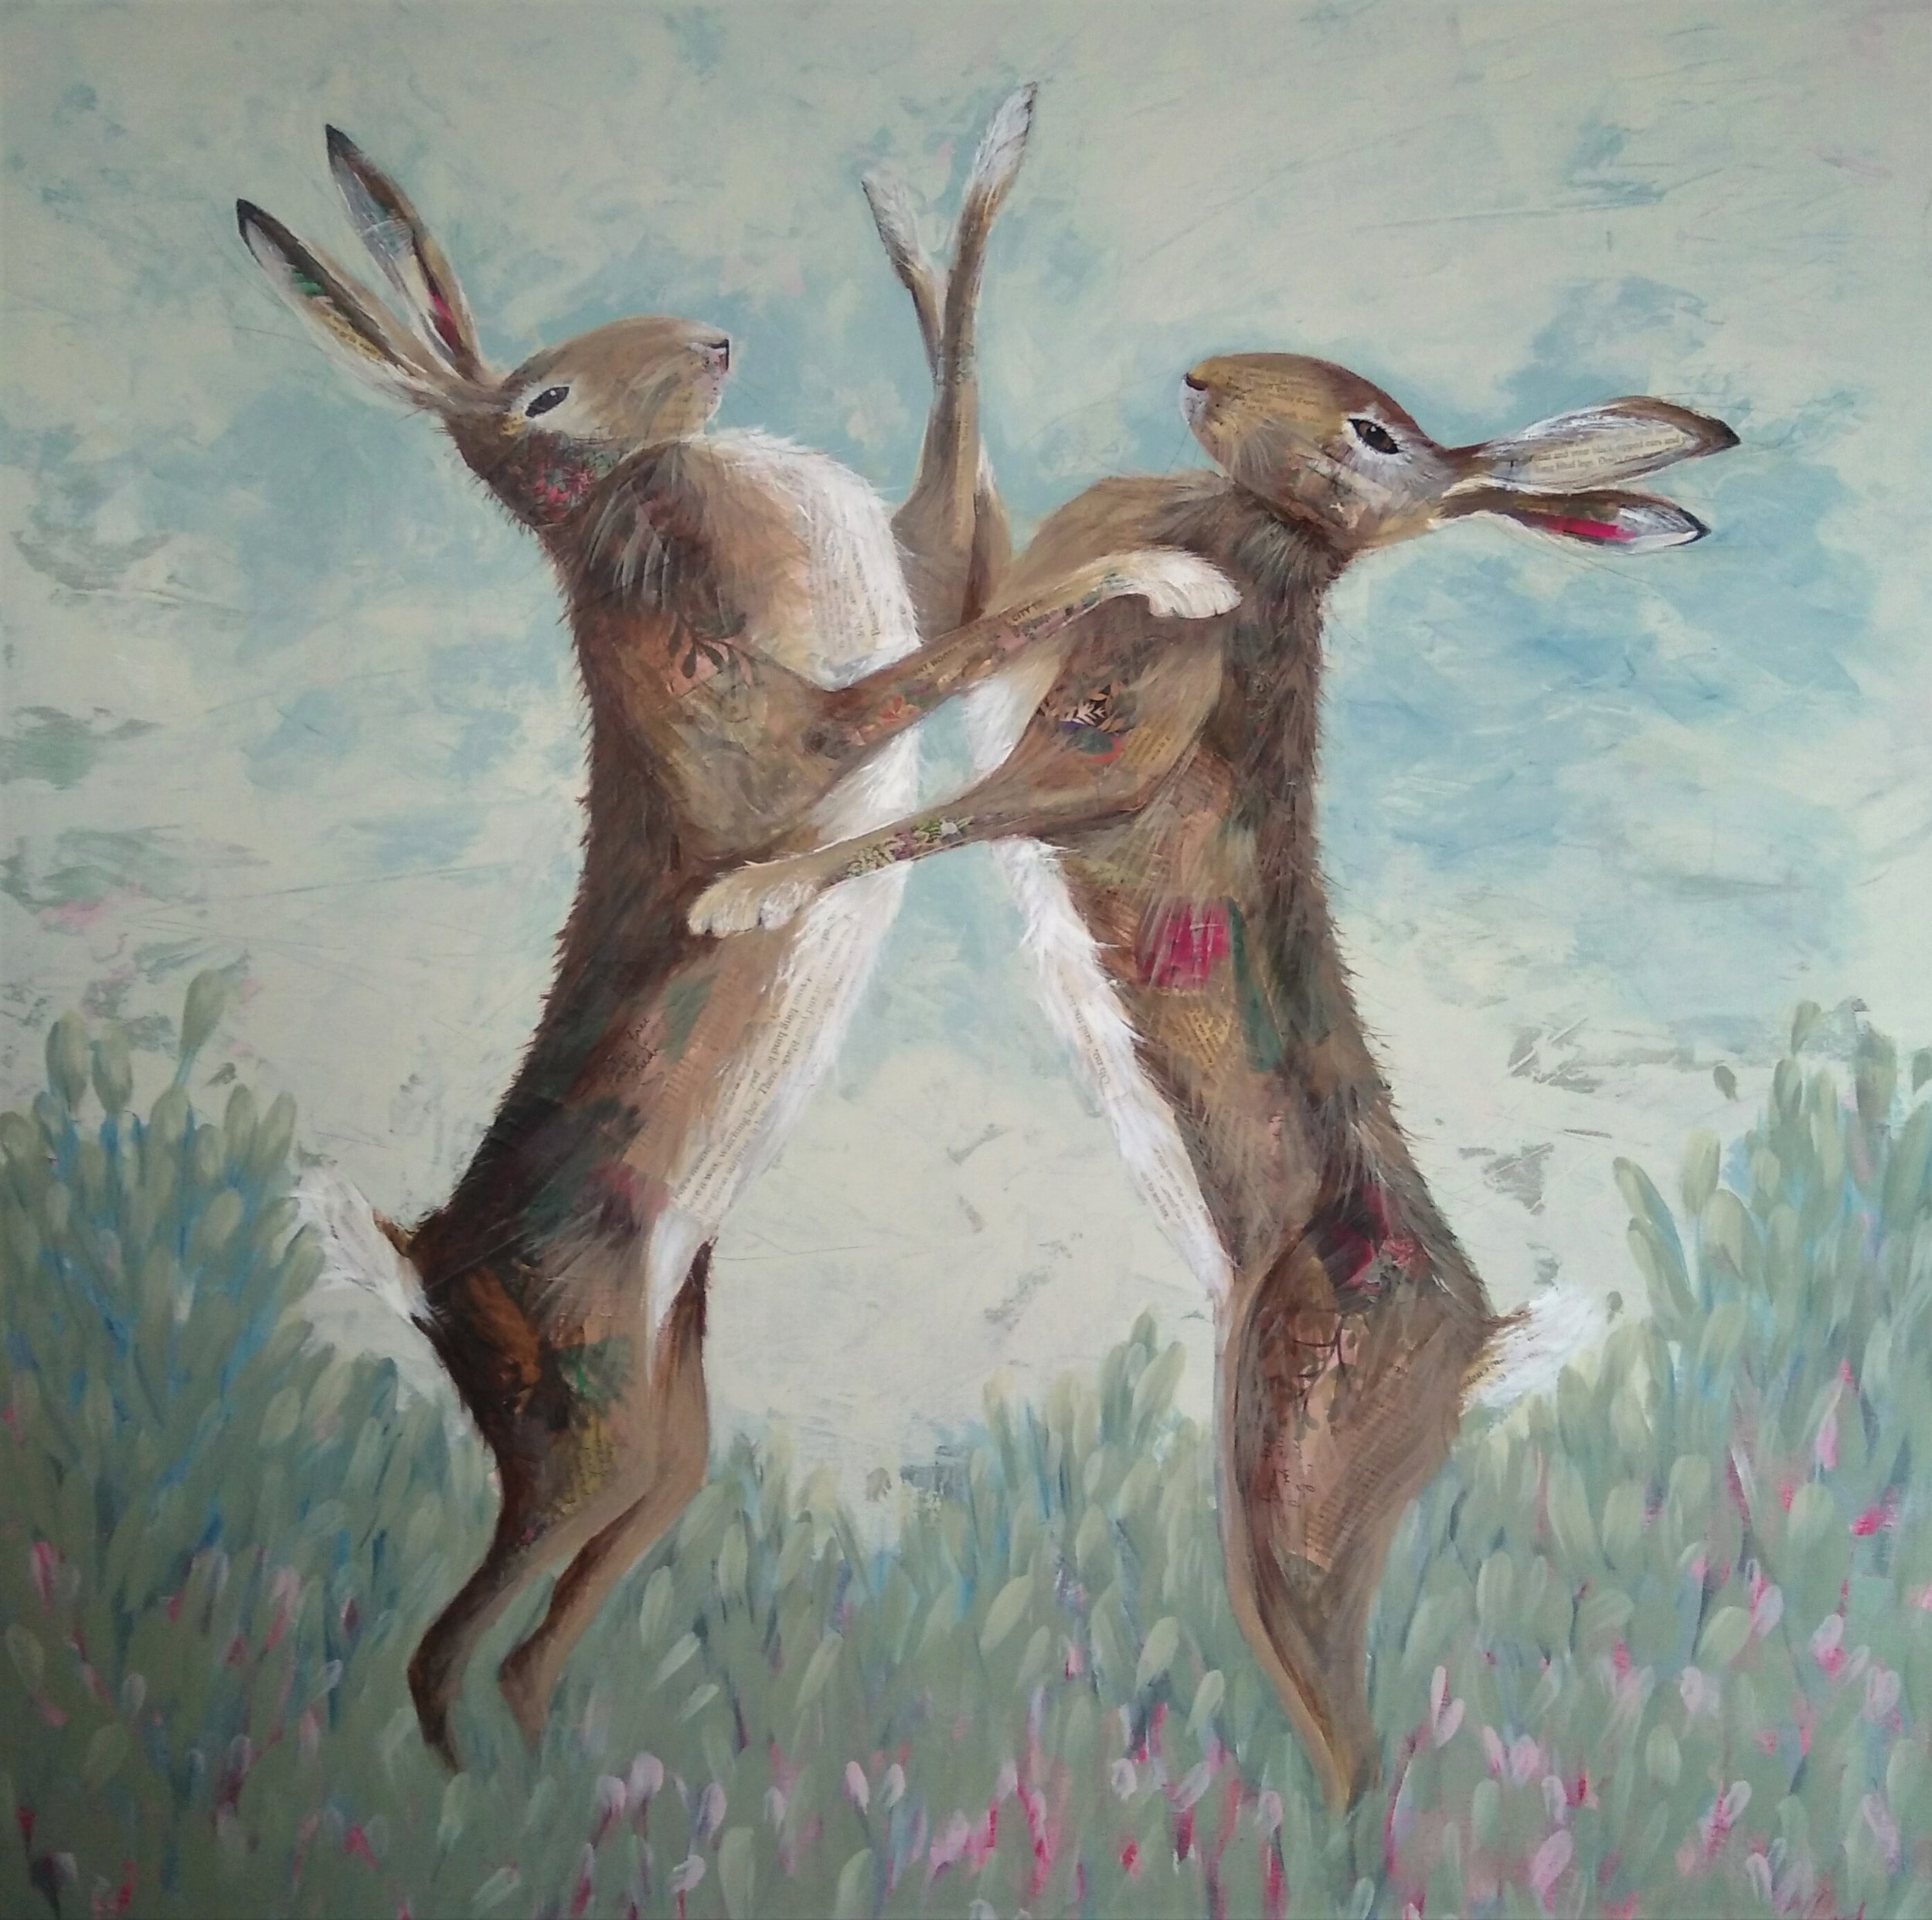  Boxing Hares (sold)